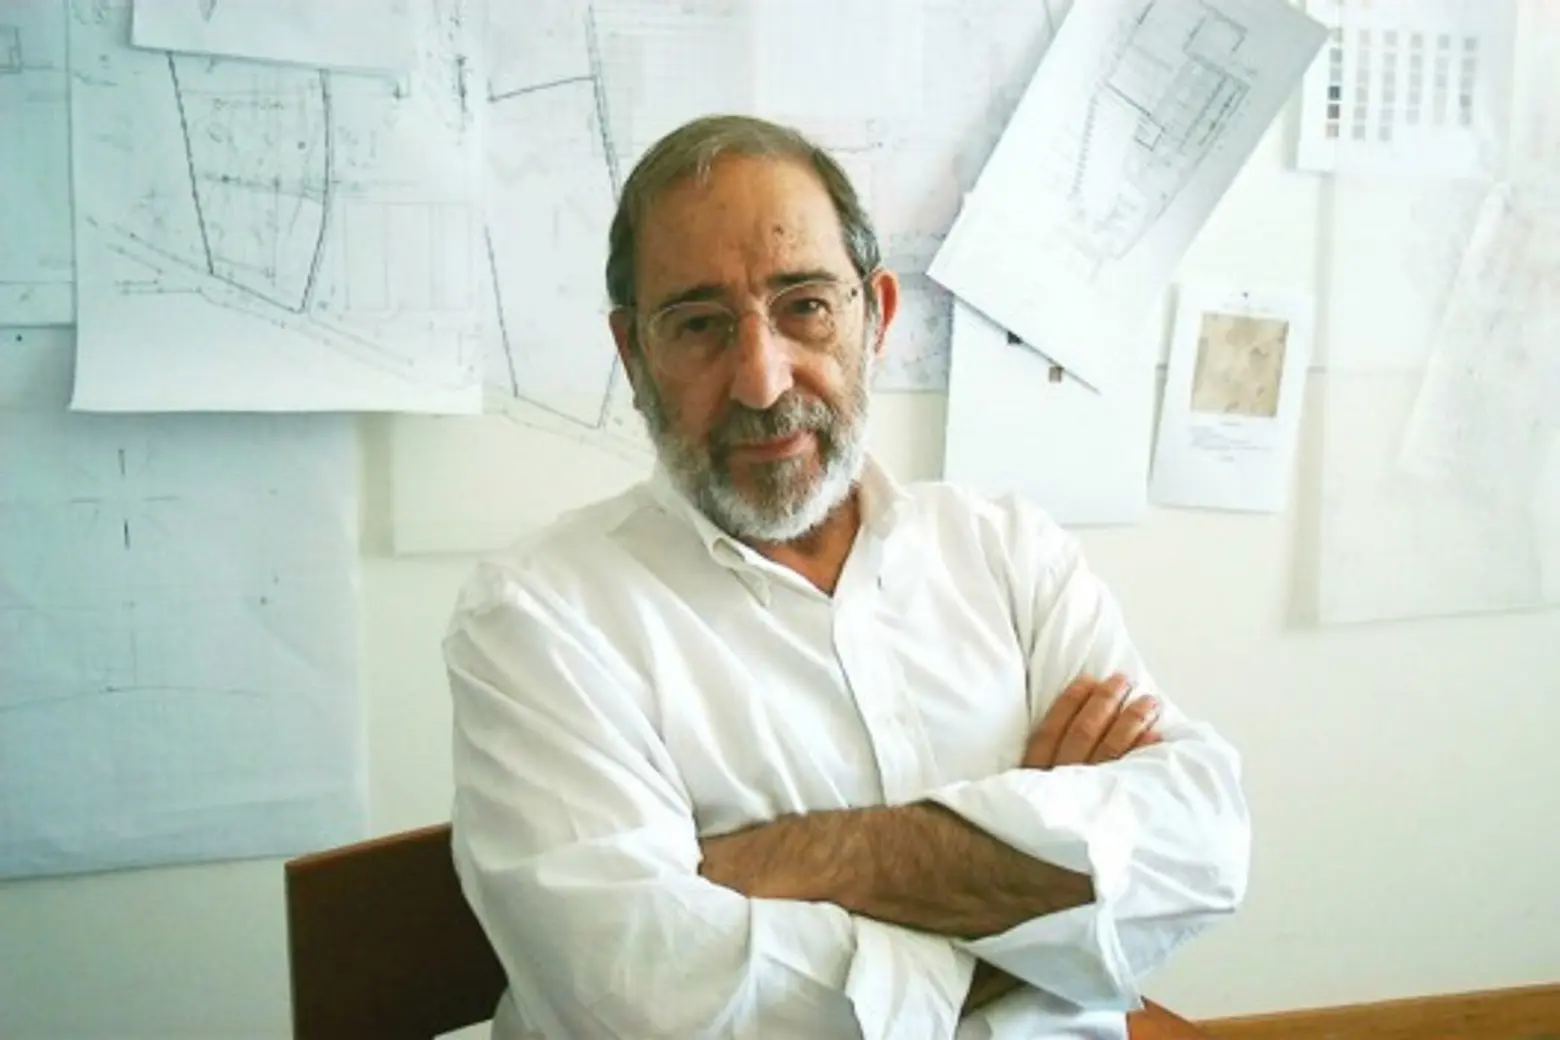 Starchitect Alvaro Siza To Design a Luxury Residential Tower; Everyone Wants to Be a Real Estate Broker